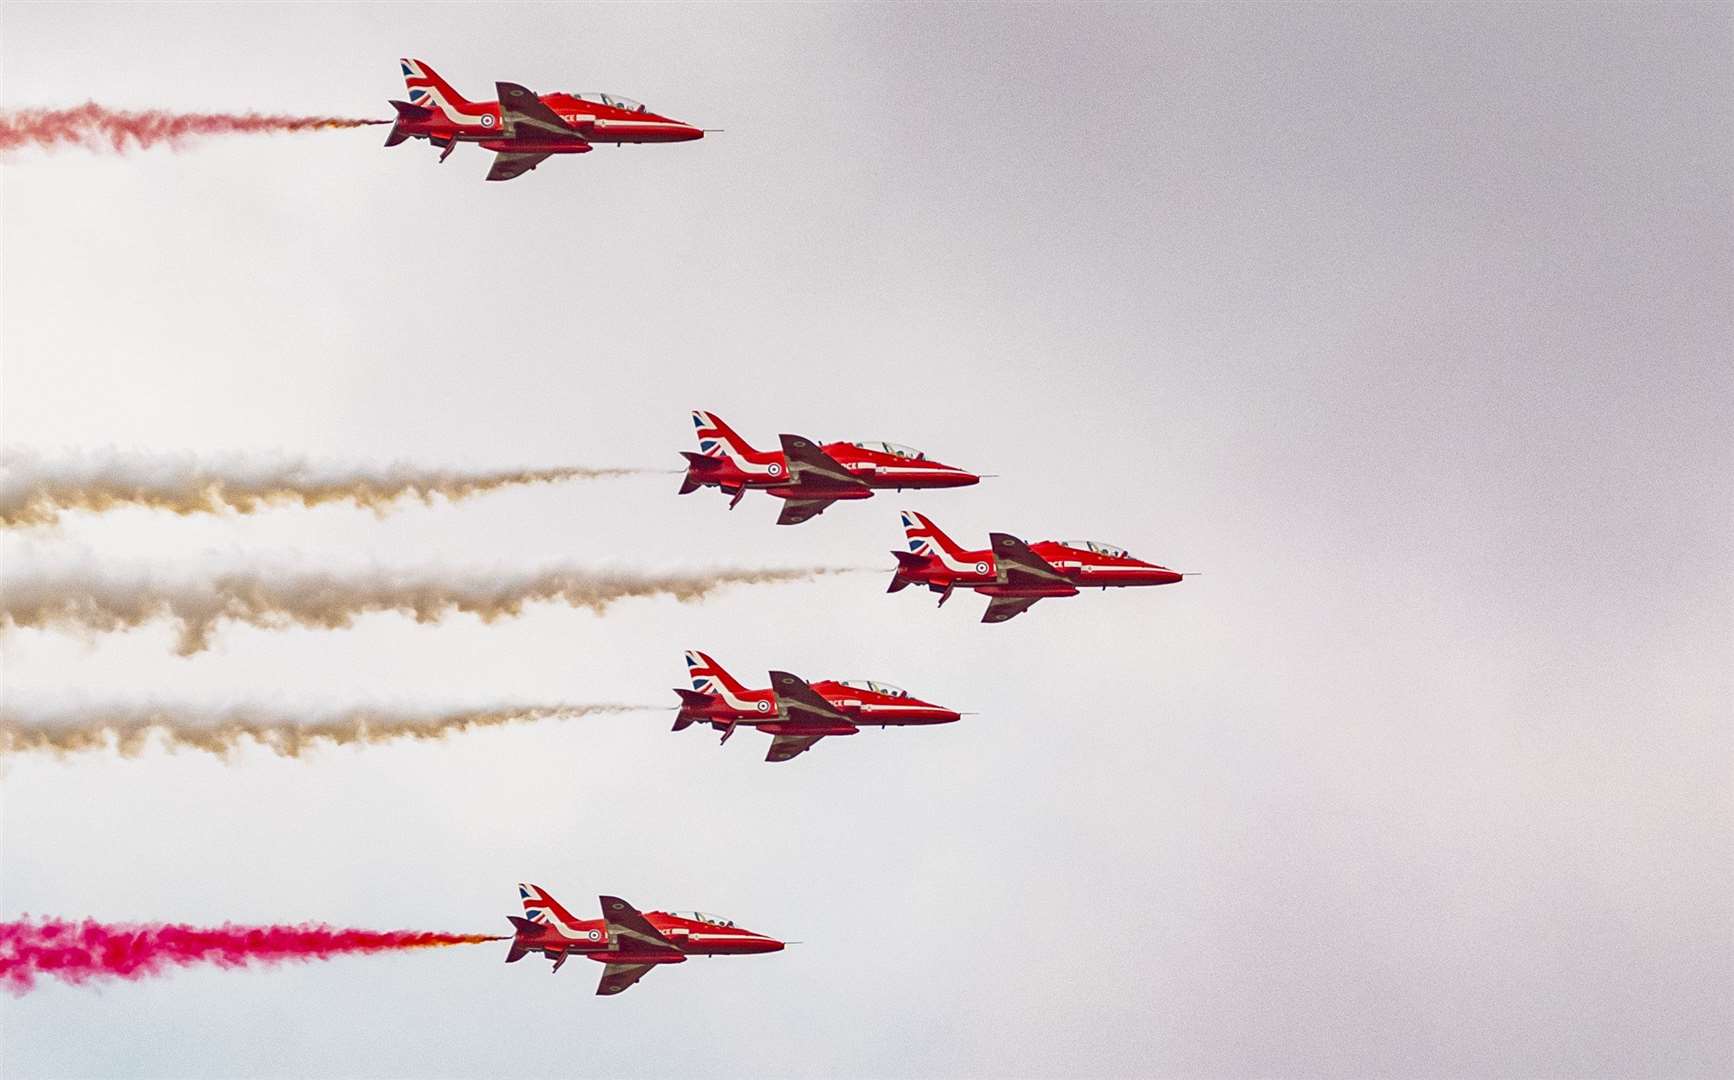 The Red Arrows will be flying over Folkestone Picture: Keith Heppell